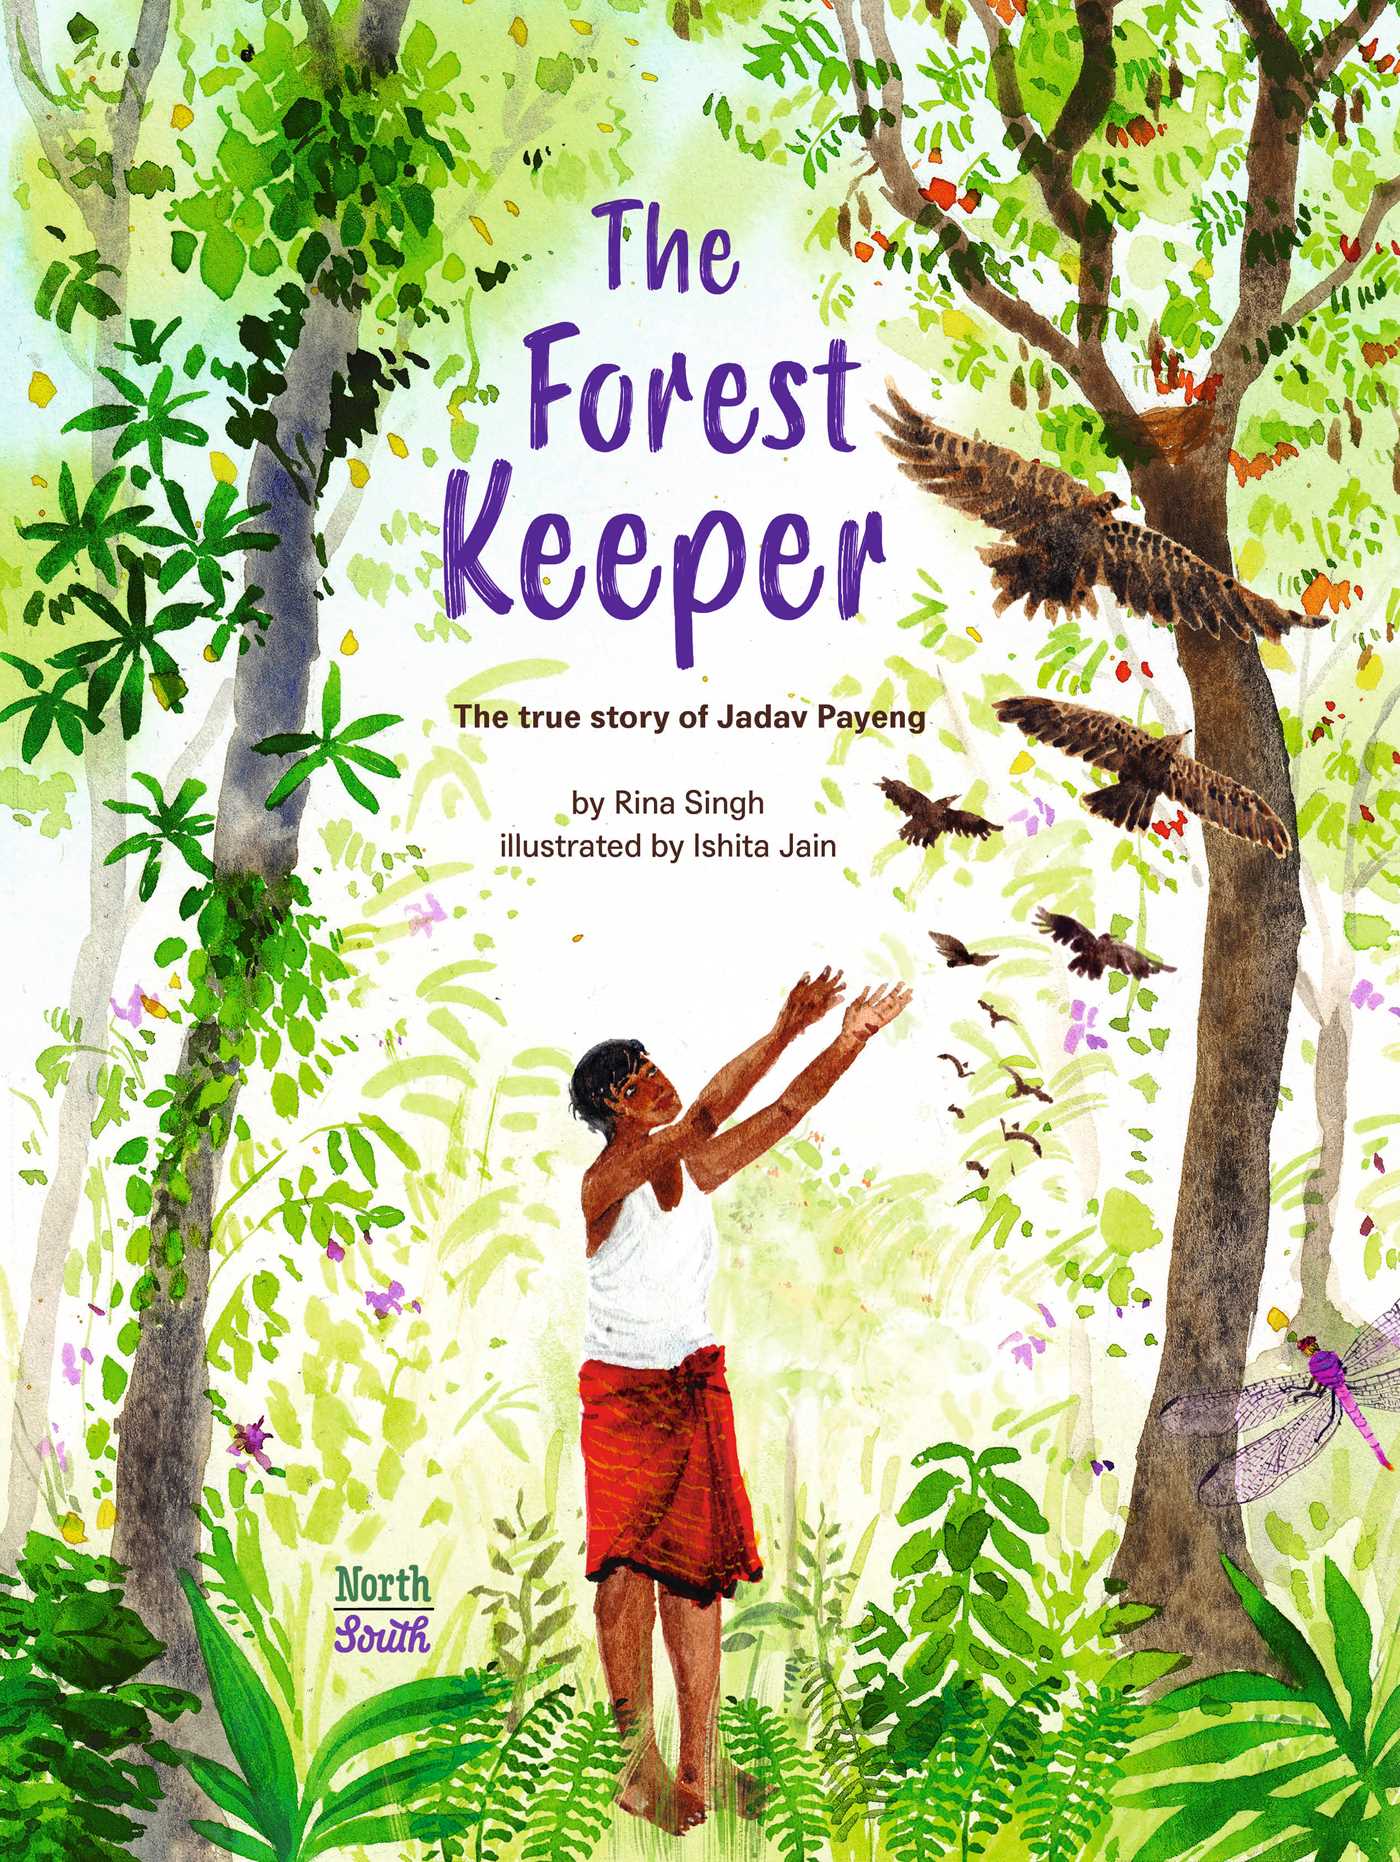 The Forest Keeper– The true story of Jadav Payeng